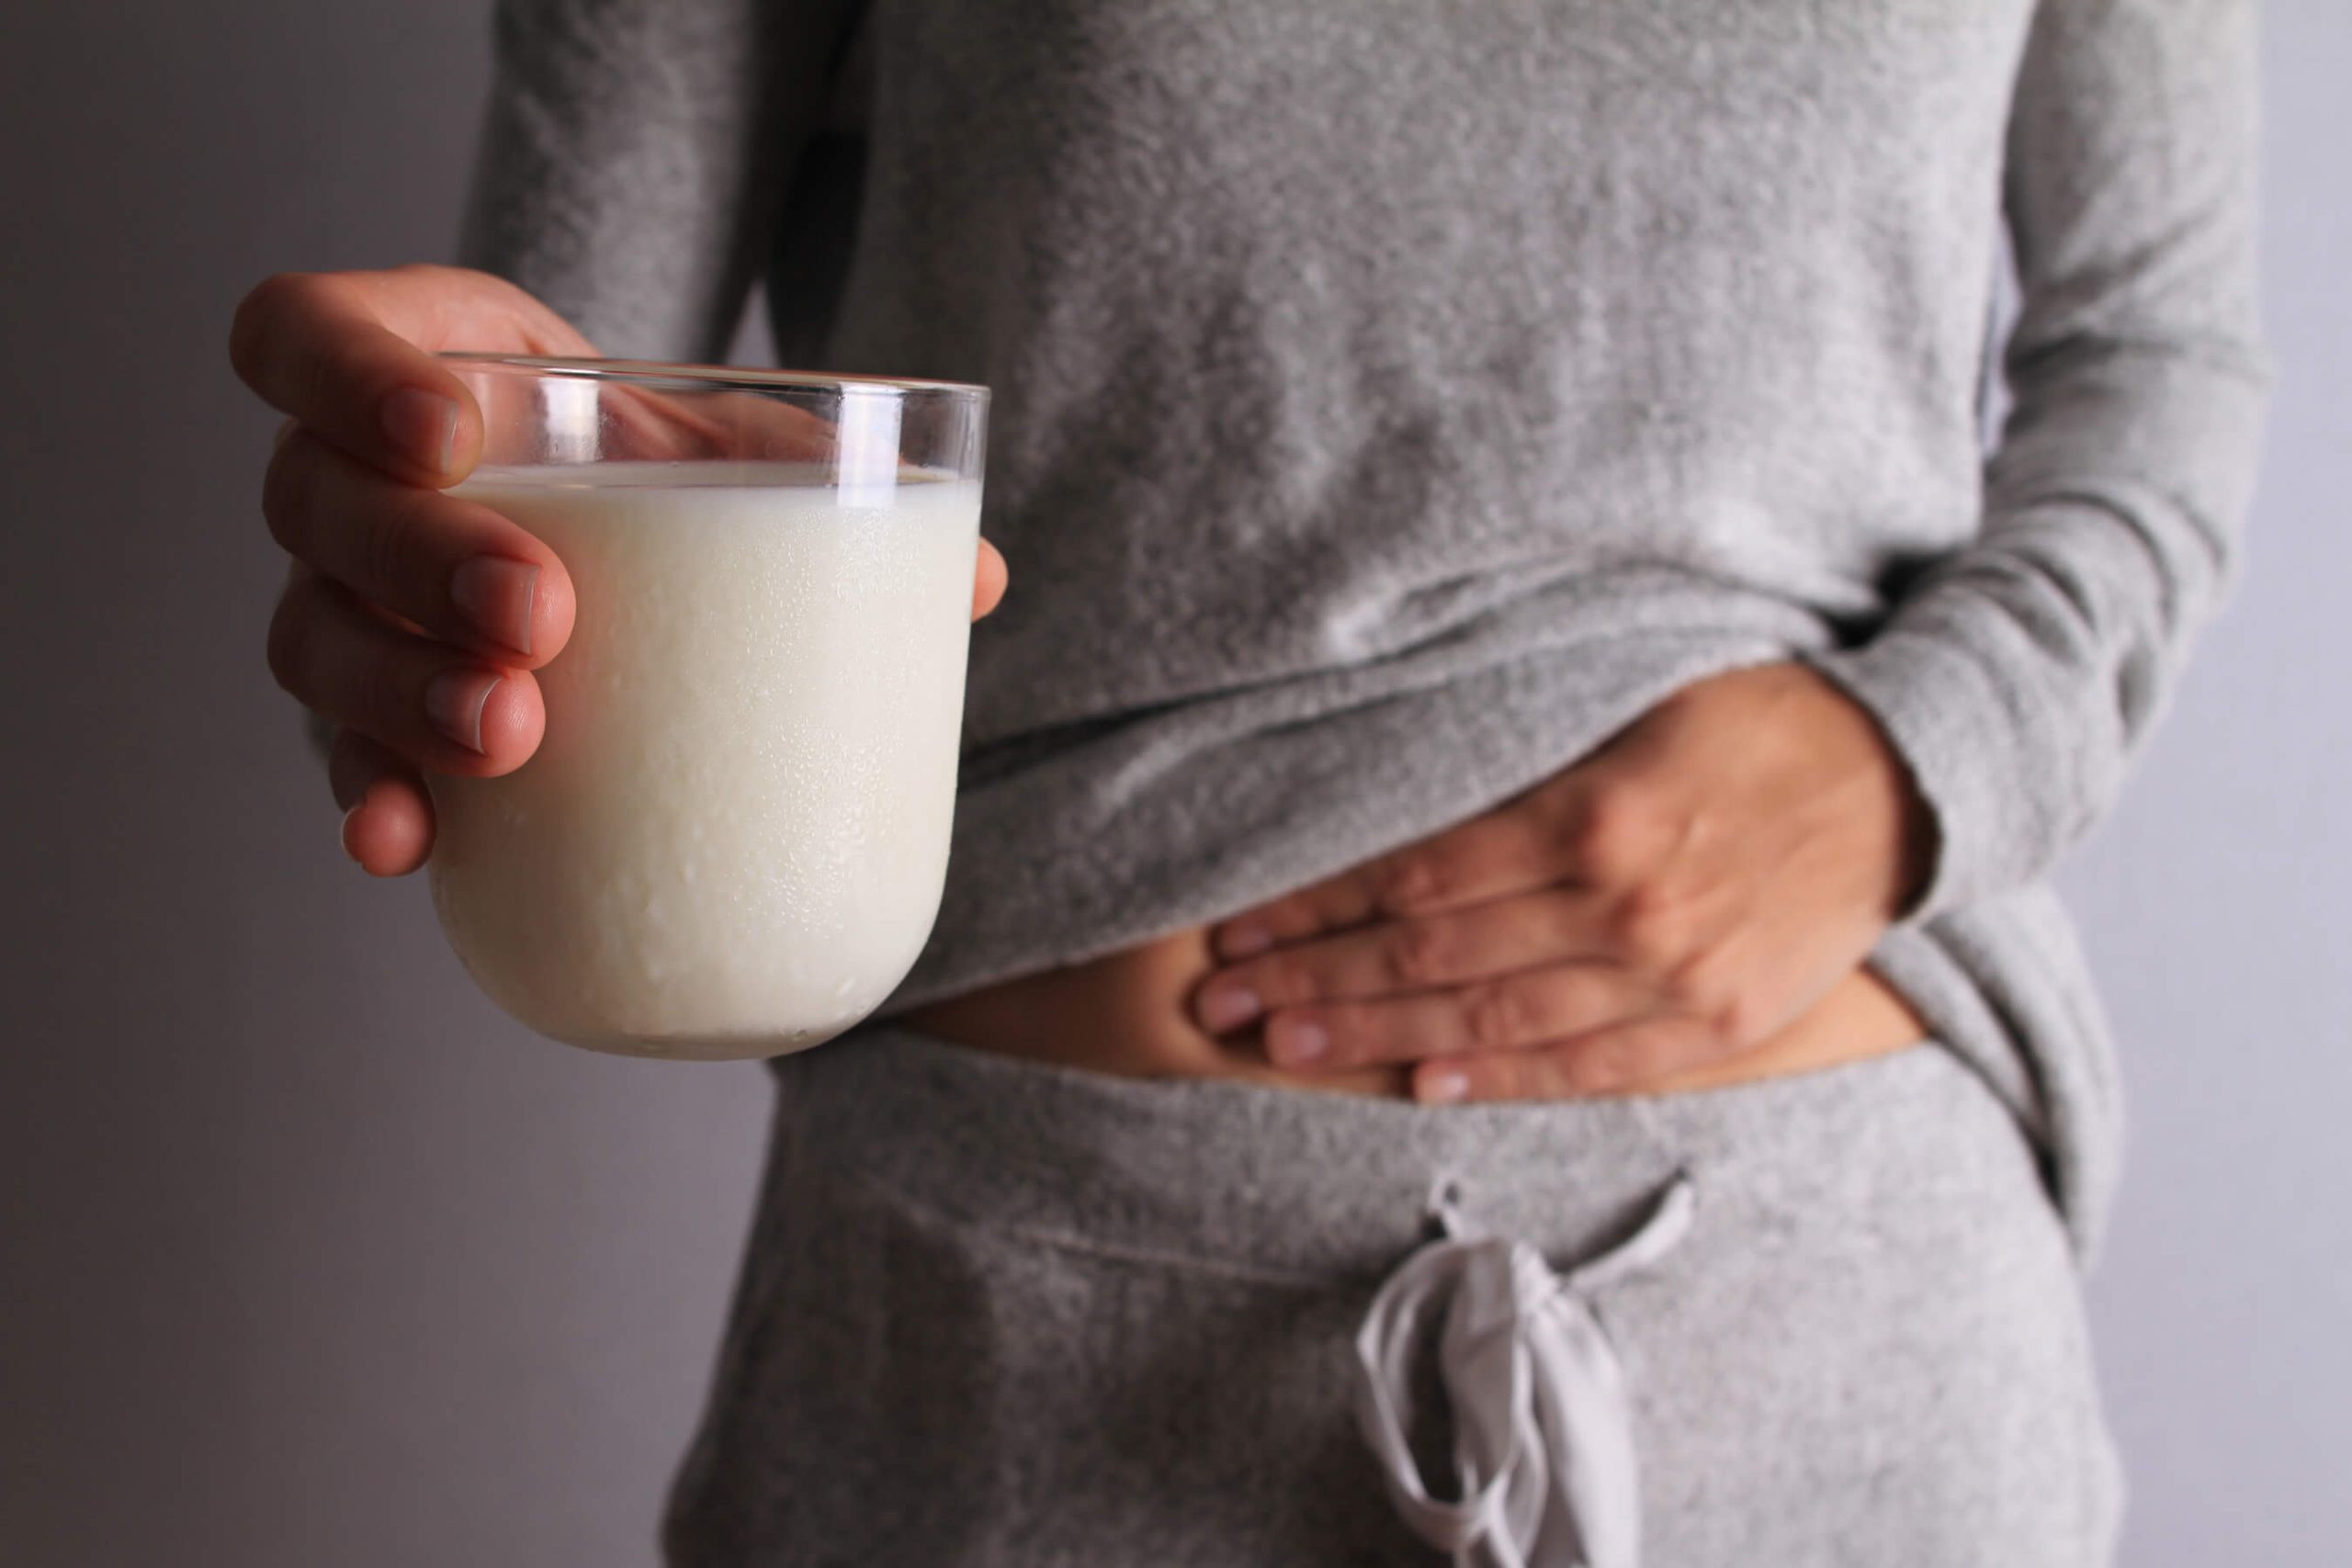 Woman with stomach pain holding a glass of milk